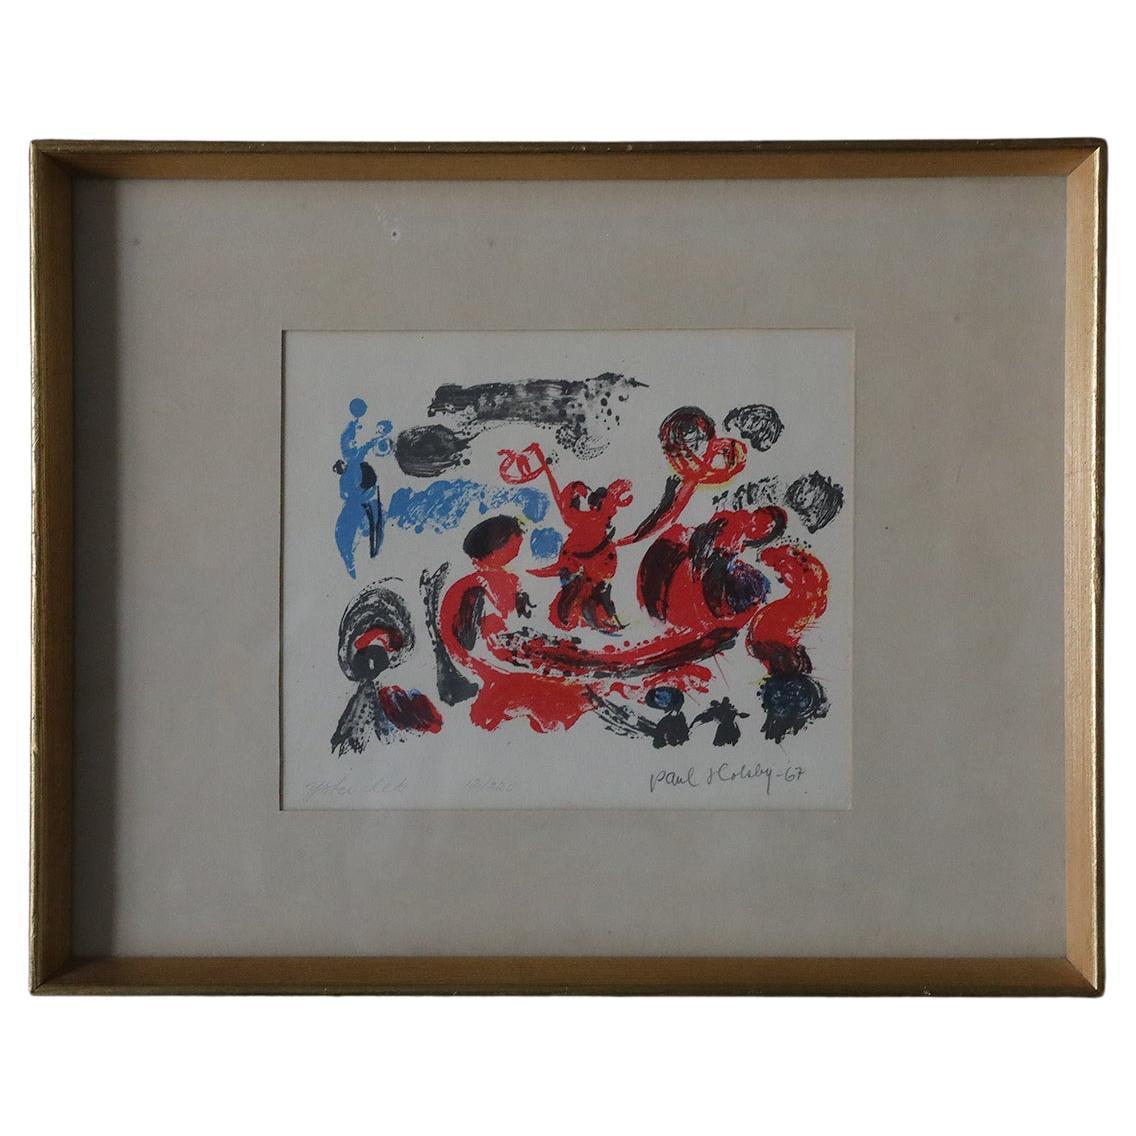 Paul Holsby, Yster lek, Color Lithograph, 1967, Framed